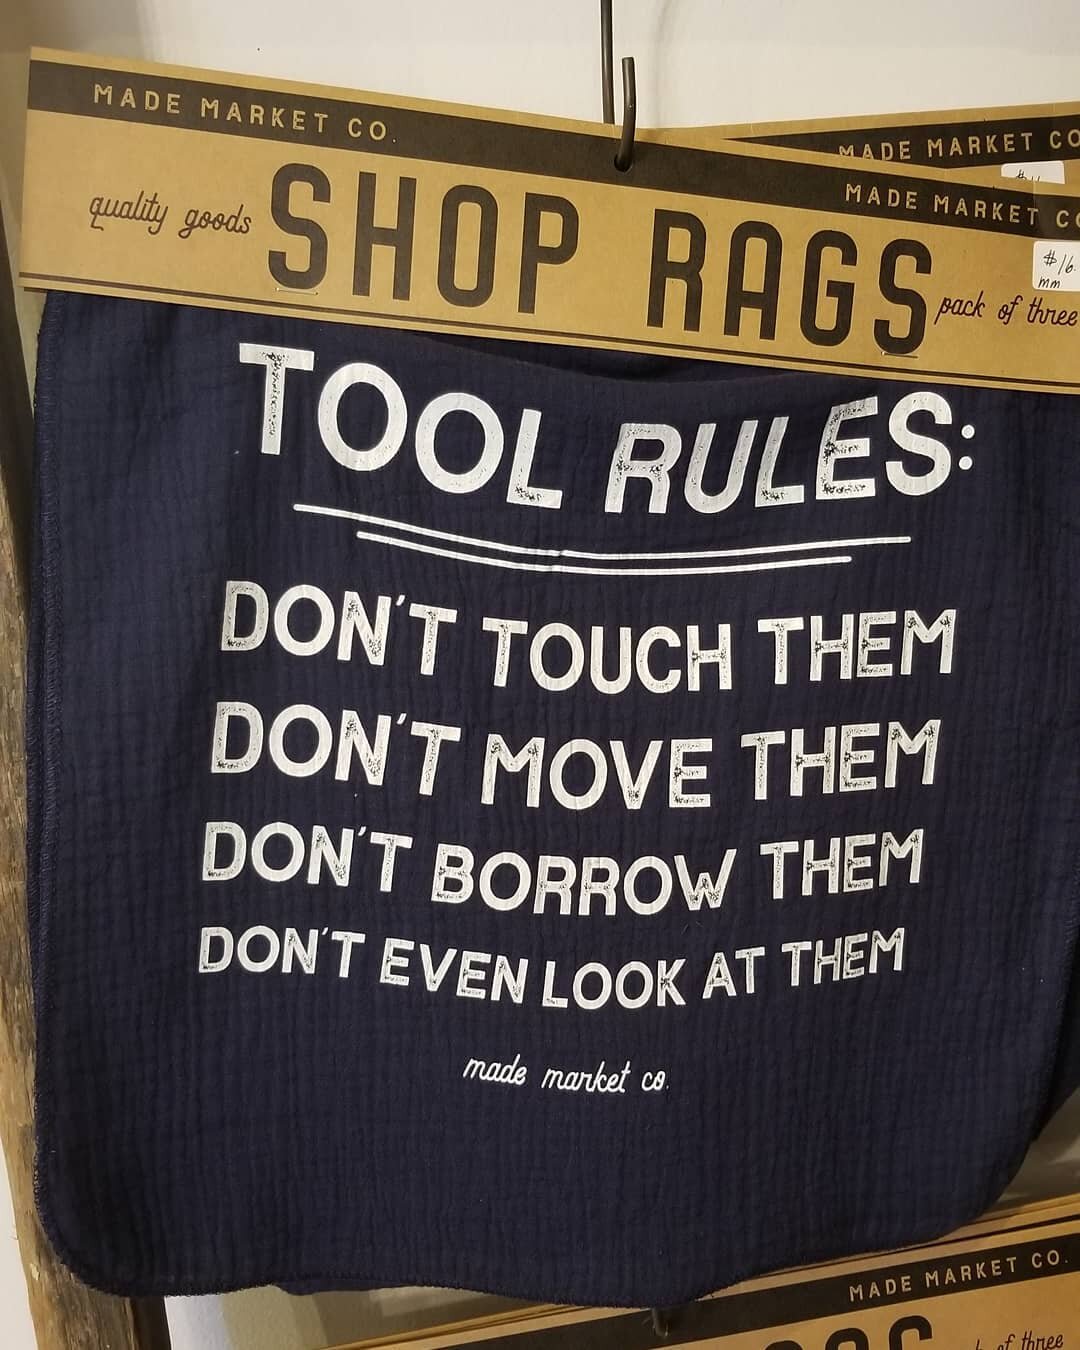 Found the shop rags/sign for my next shop in a small town in PA. 
.
#shoprags #woodworking #woodwork #woodpreneur #woodshop #workshop #shopshot #shoptime #speakingmylanguage